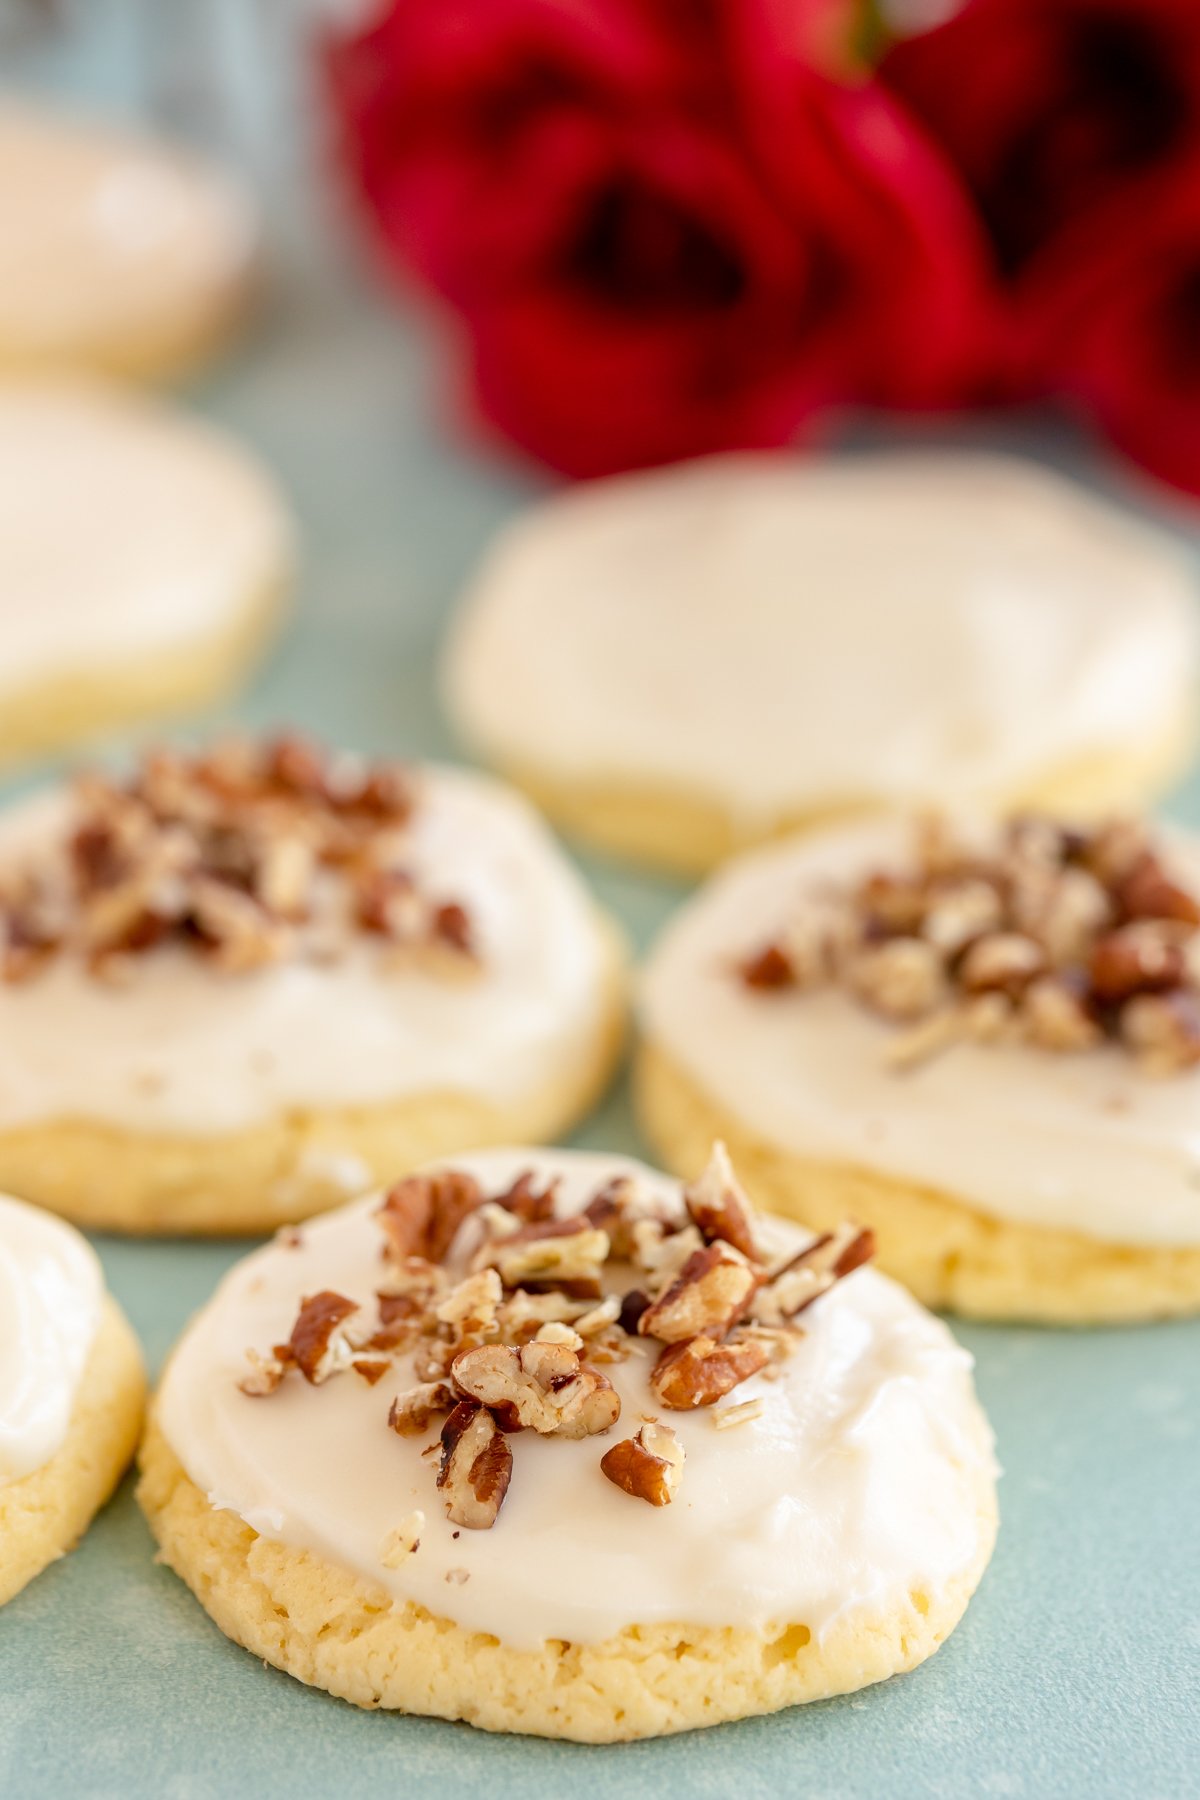 Kentucky butter cookies with pecans on it